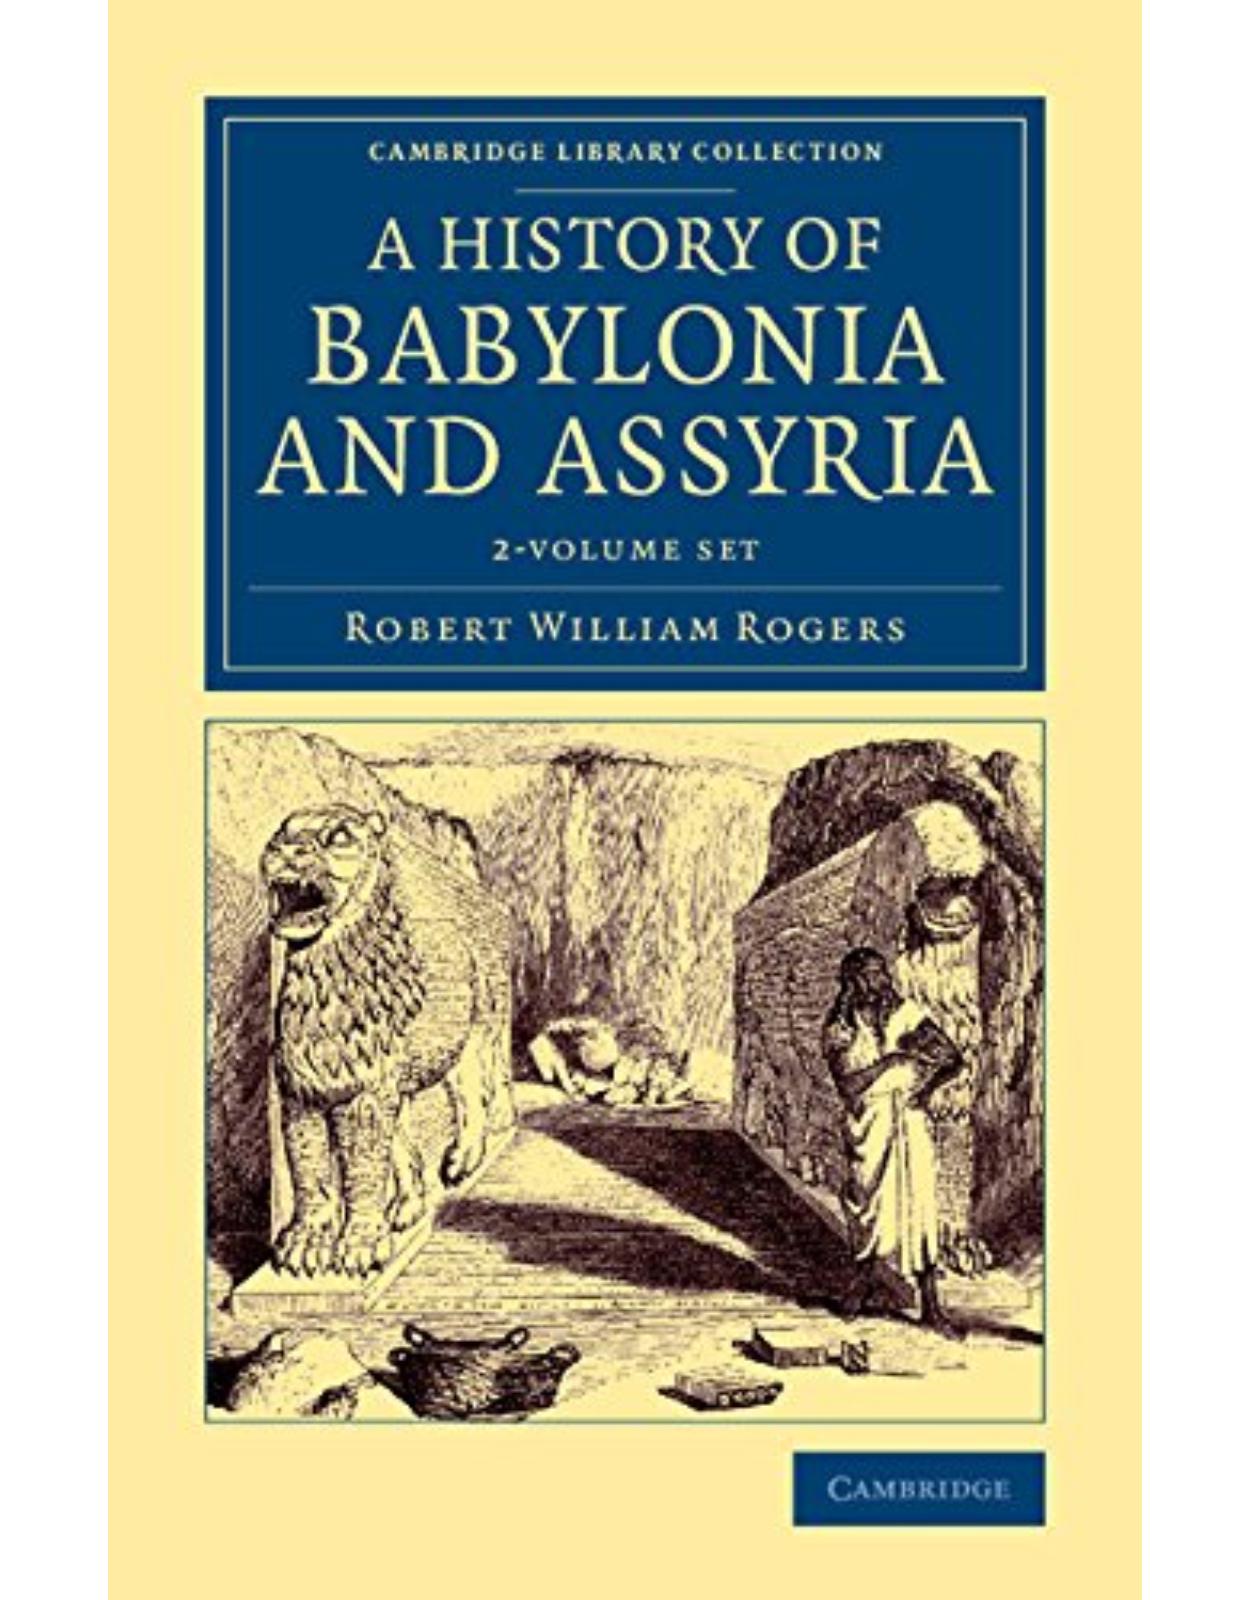 History of Babylonia and Assyria 2 Volume Set (Cambridge Library Collection - Archaeology)